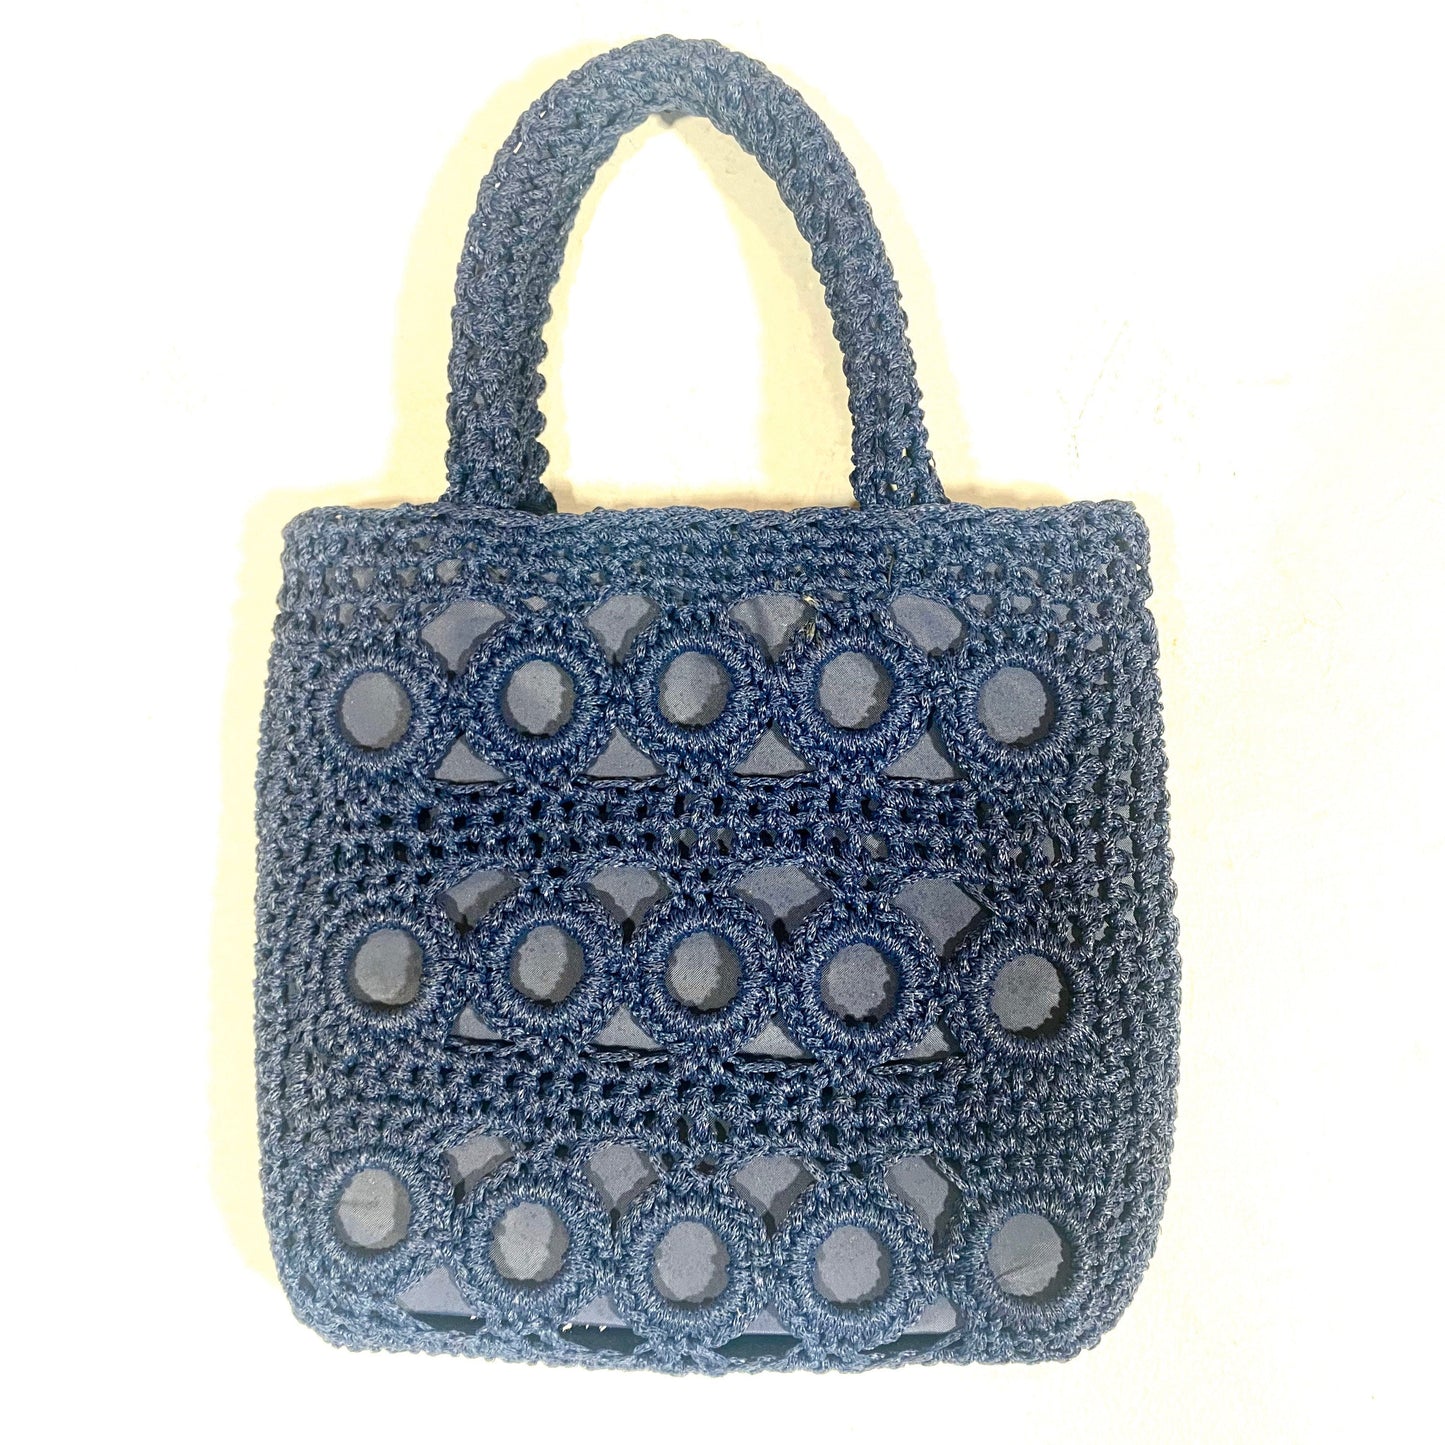 1960s Deep navy blue crochet / macramé cloth bag, in mint condition, made in Italy